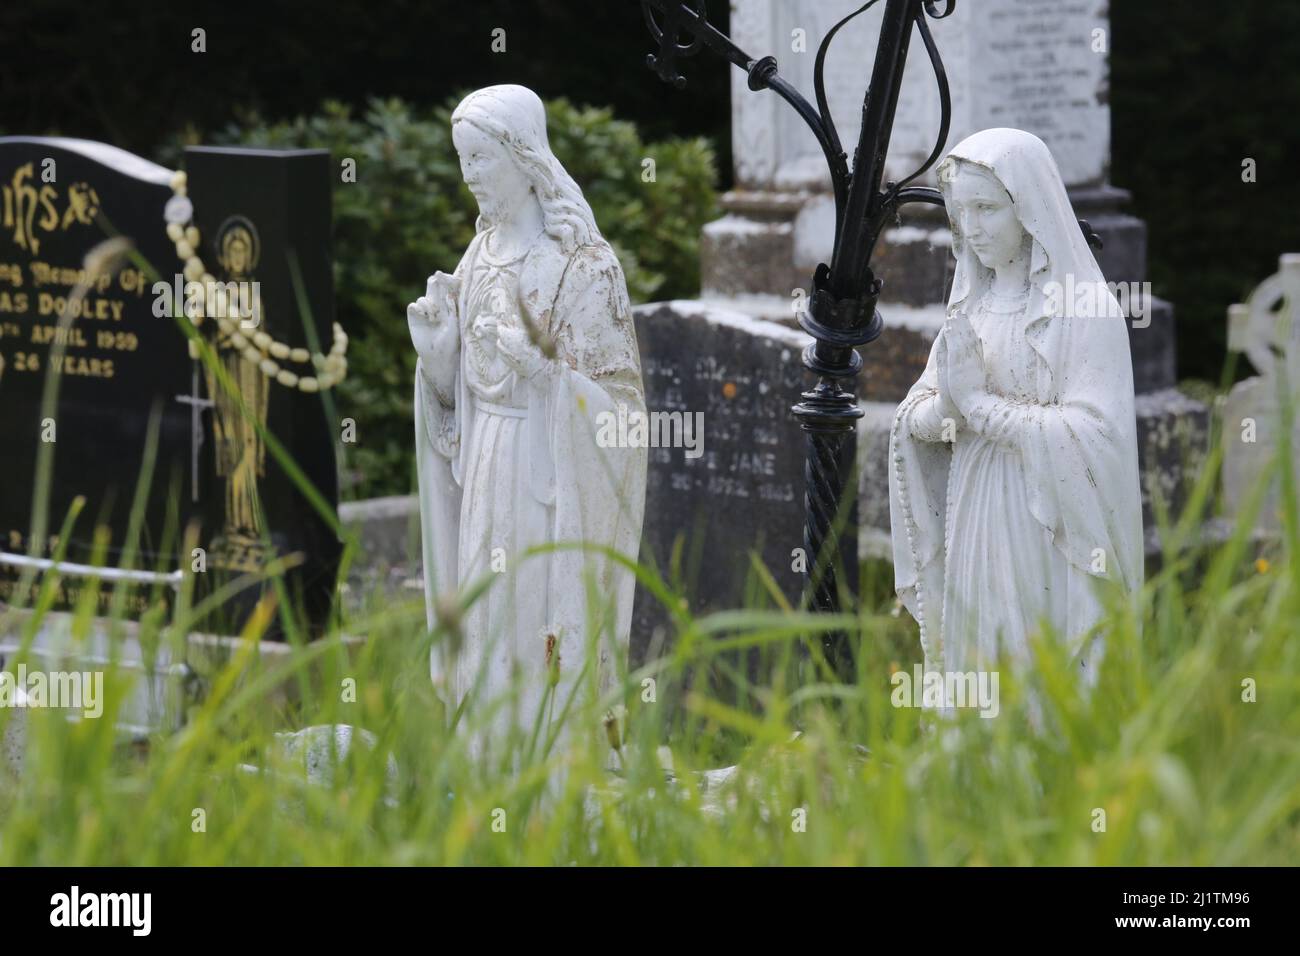 Religious statues in a cemetery in Ireland among other Catholic symbols including a Celtic cross. Stock Photo